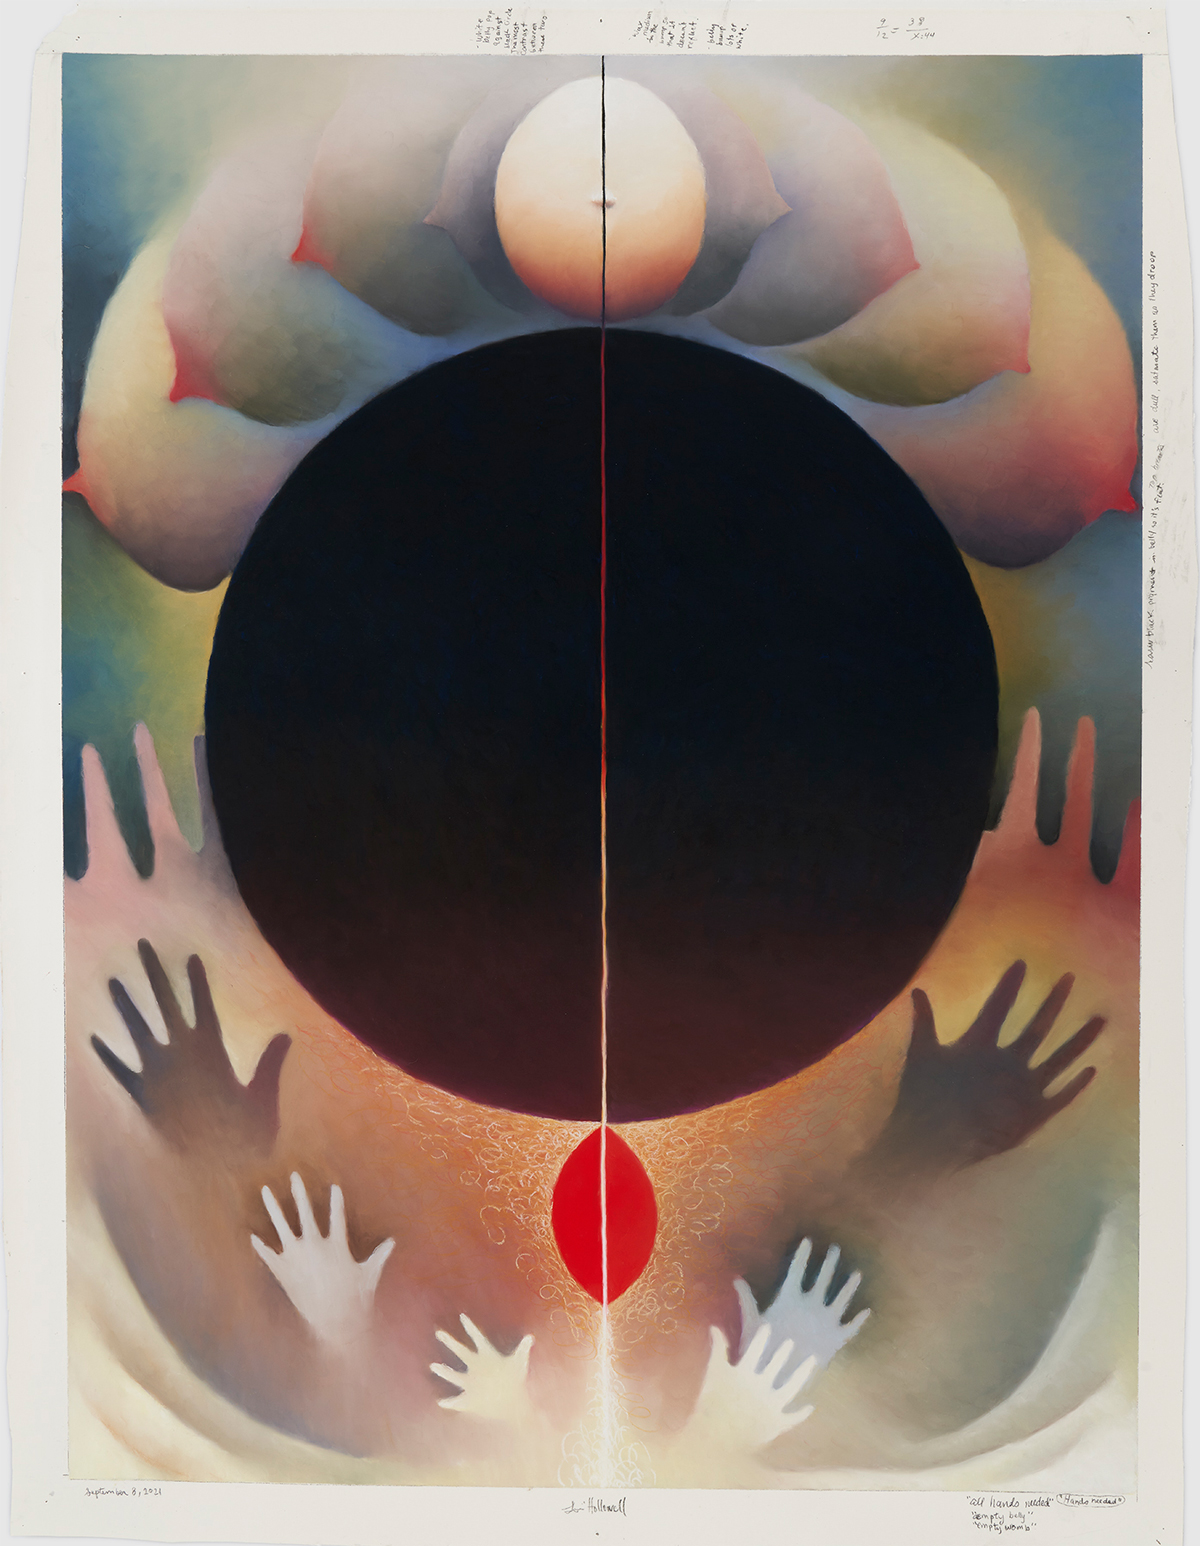 Vertical soft pastel drawing with black circle at center, surrounded by breasts, hands and a red vagina shape